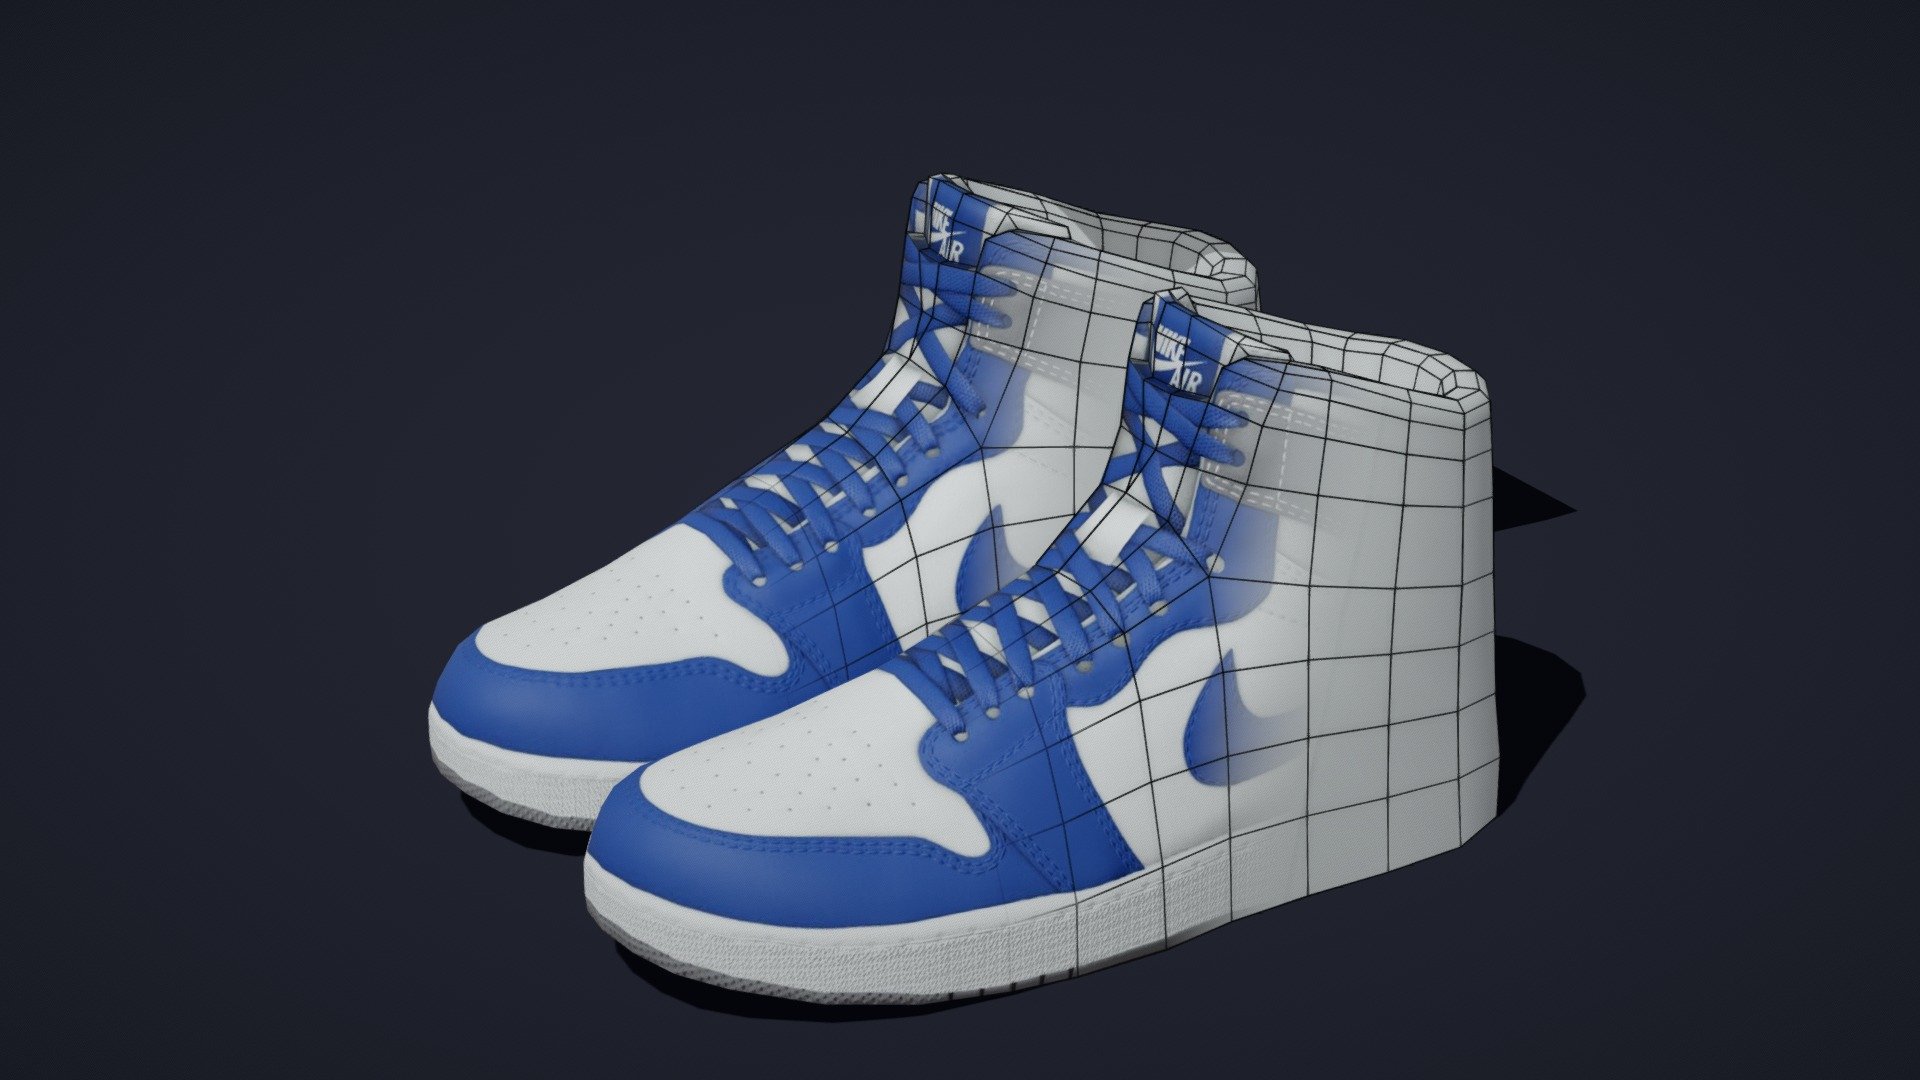 It is a High Quality Very Low poly Air Jordan NIKE Shoes 3d model

Model in the View with wireframe is to show how much low poly it is
Model without wireframe is above it.

Will be perfect for any Cool 3d metaverse Project, as it is verly low poly and low date file

Model : Each Pair of shoe have 822 Face and 796 Verts. Model in the Center is to show low poly Wireframe.

Texture : 3 Baked Texture in High quality 2k texture

1) Diffuse 2) Metallic_Roughness 3) Normal

Texture are baked from highpoly model to lowpoly

GLB file : Size of each pair is below 1mb including all the textures

Pack of 10 : https://skfb.ly/oQUwo

Highpoly : https://skfb.ly/oFGBX - Air Jordan Nike shoes - 01 - Low poly - Buy Royalty Free 3D model by 5th Dimension (@5th-Dimension) 3d model